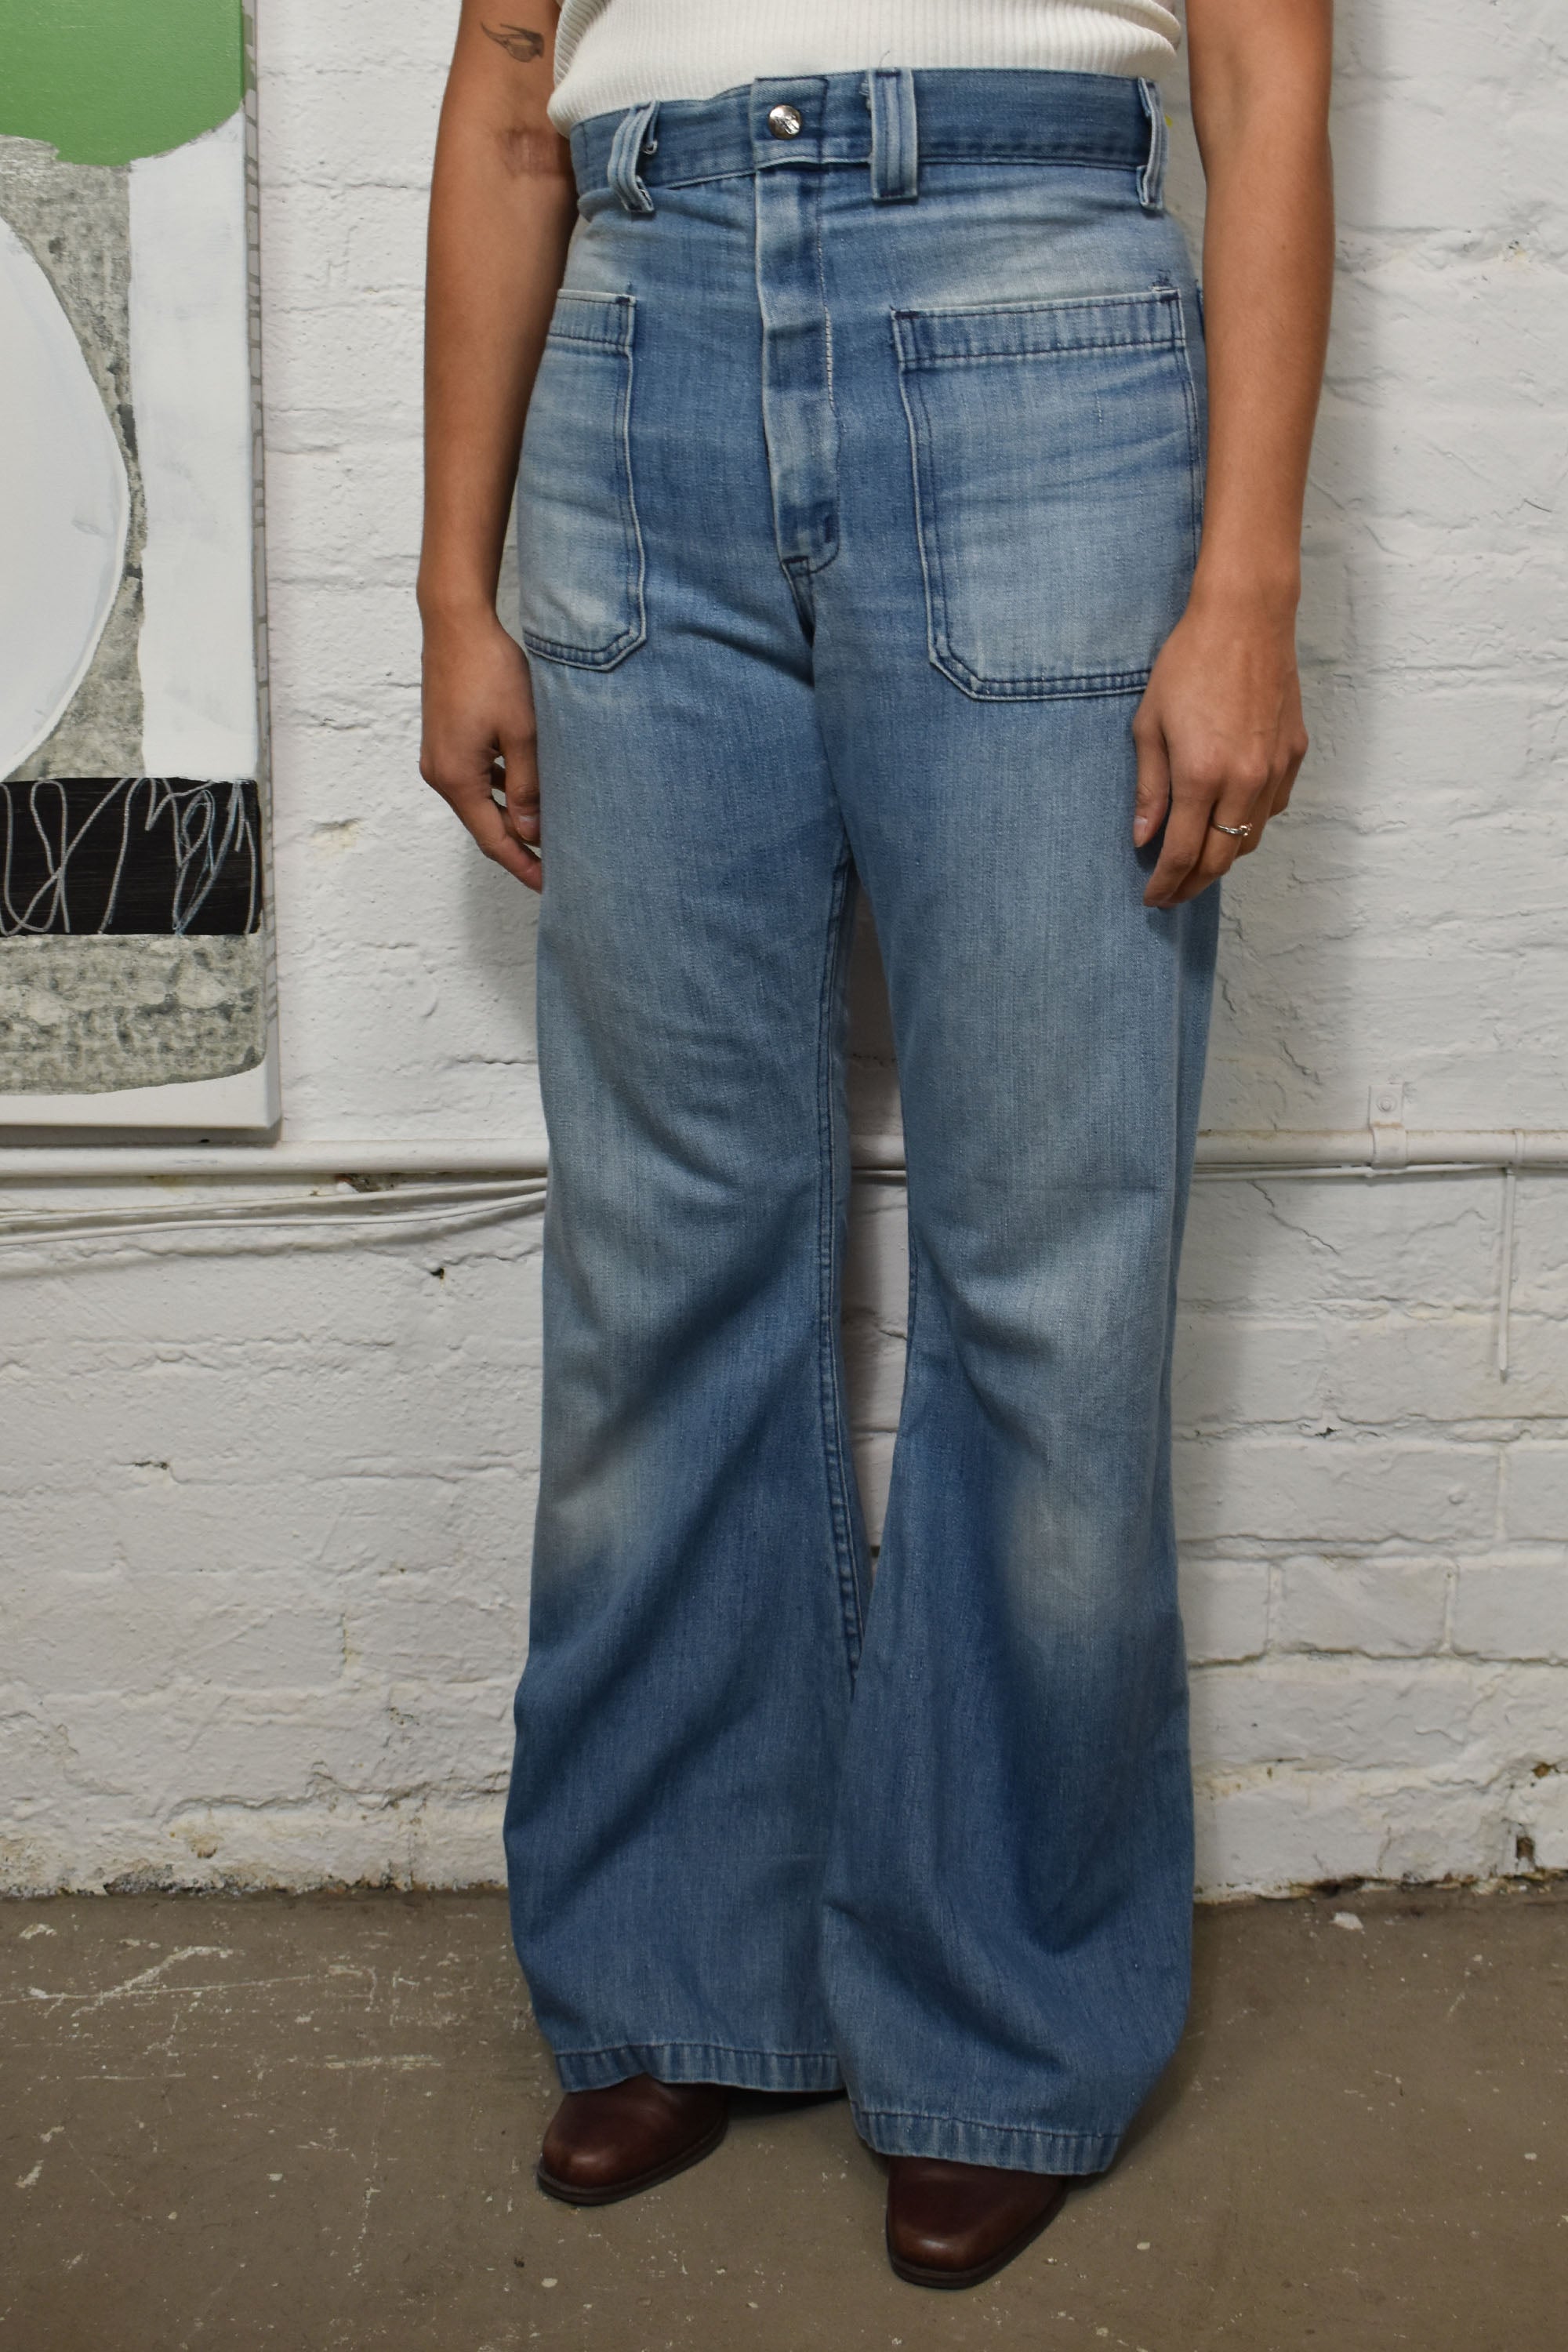 Vintage Seafarer 70's Bellbottom Pants: 70s style (made in 90s